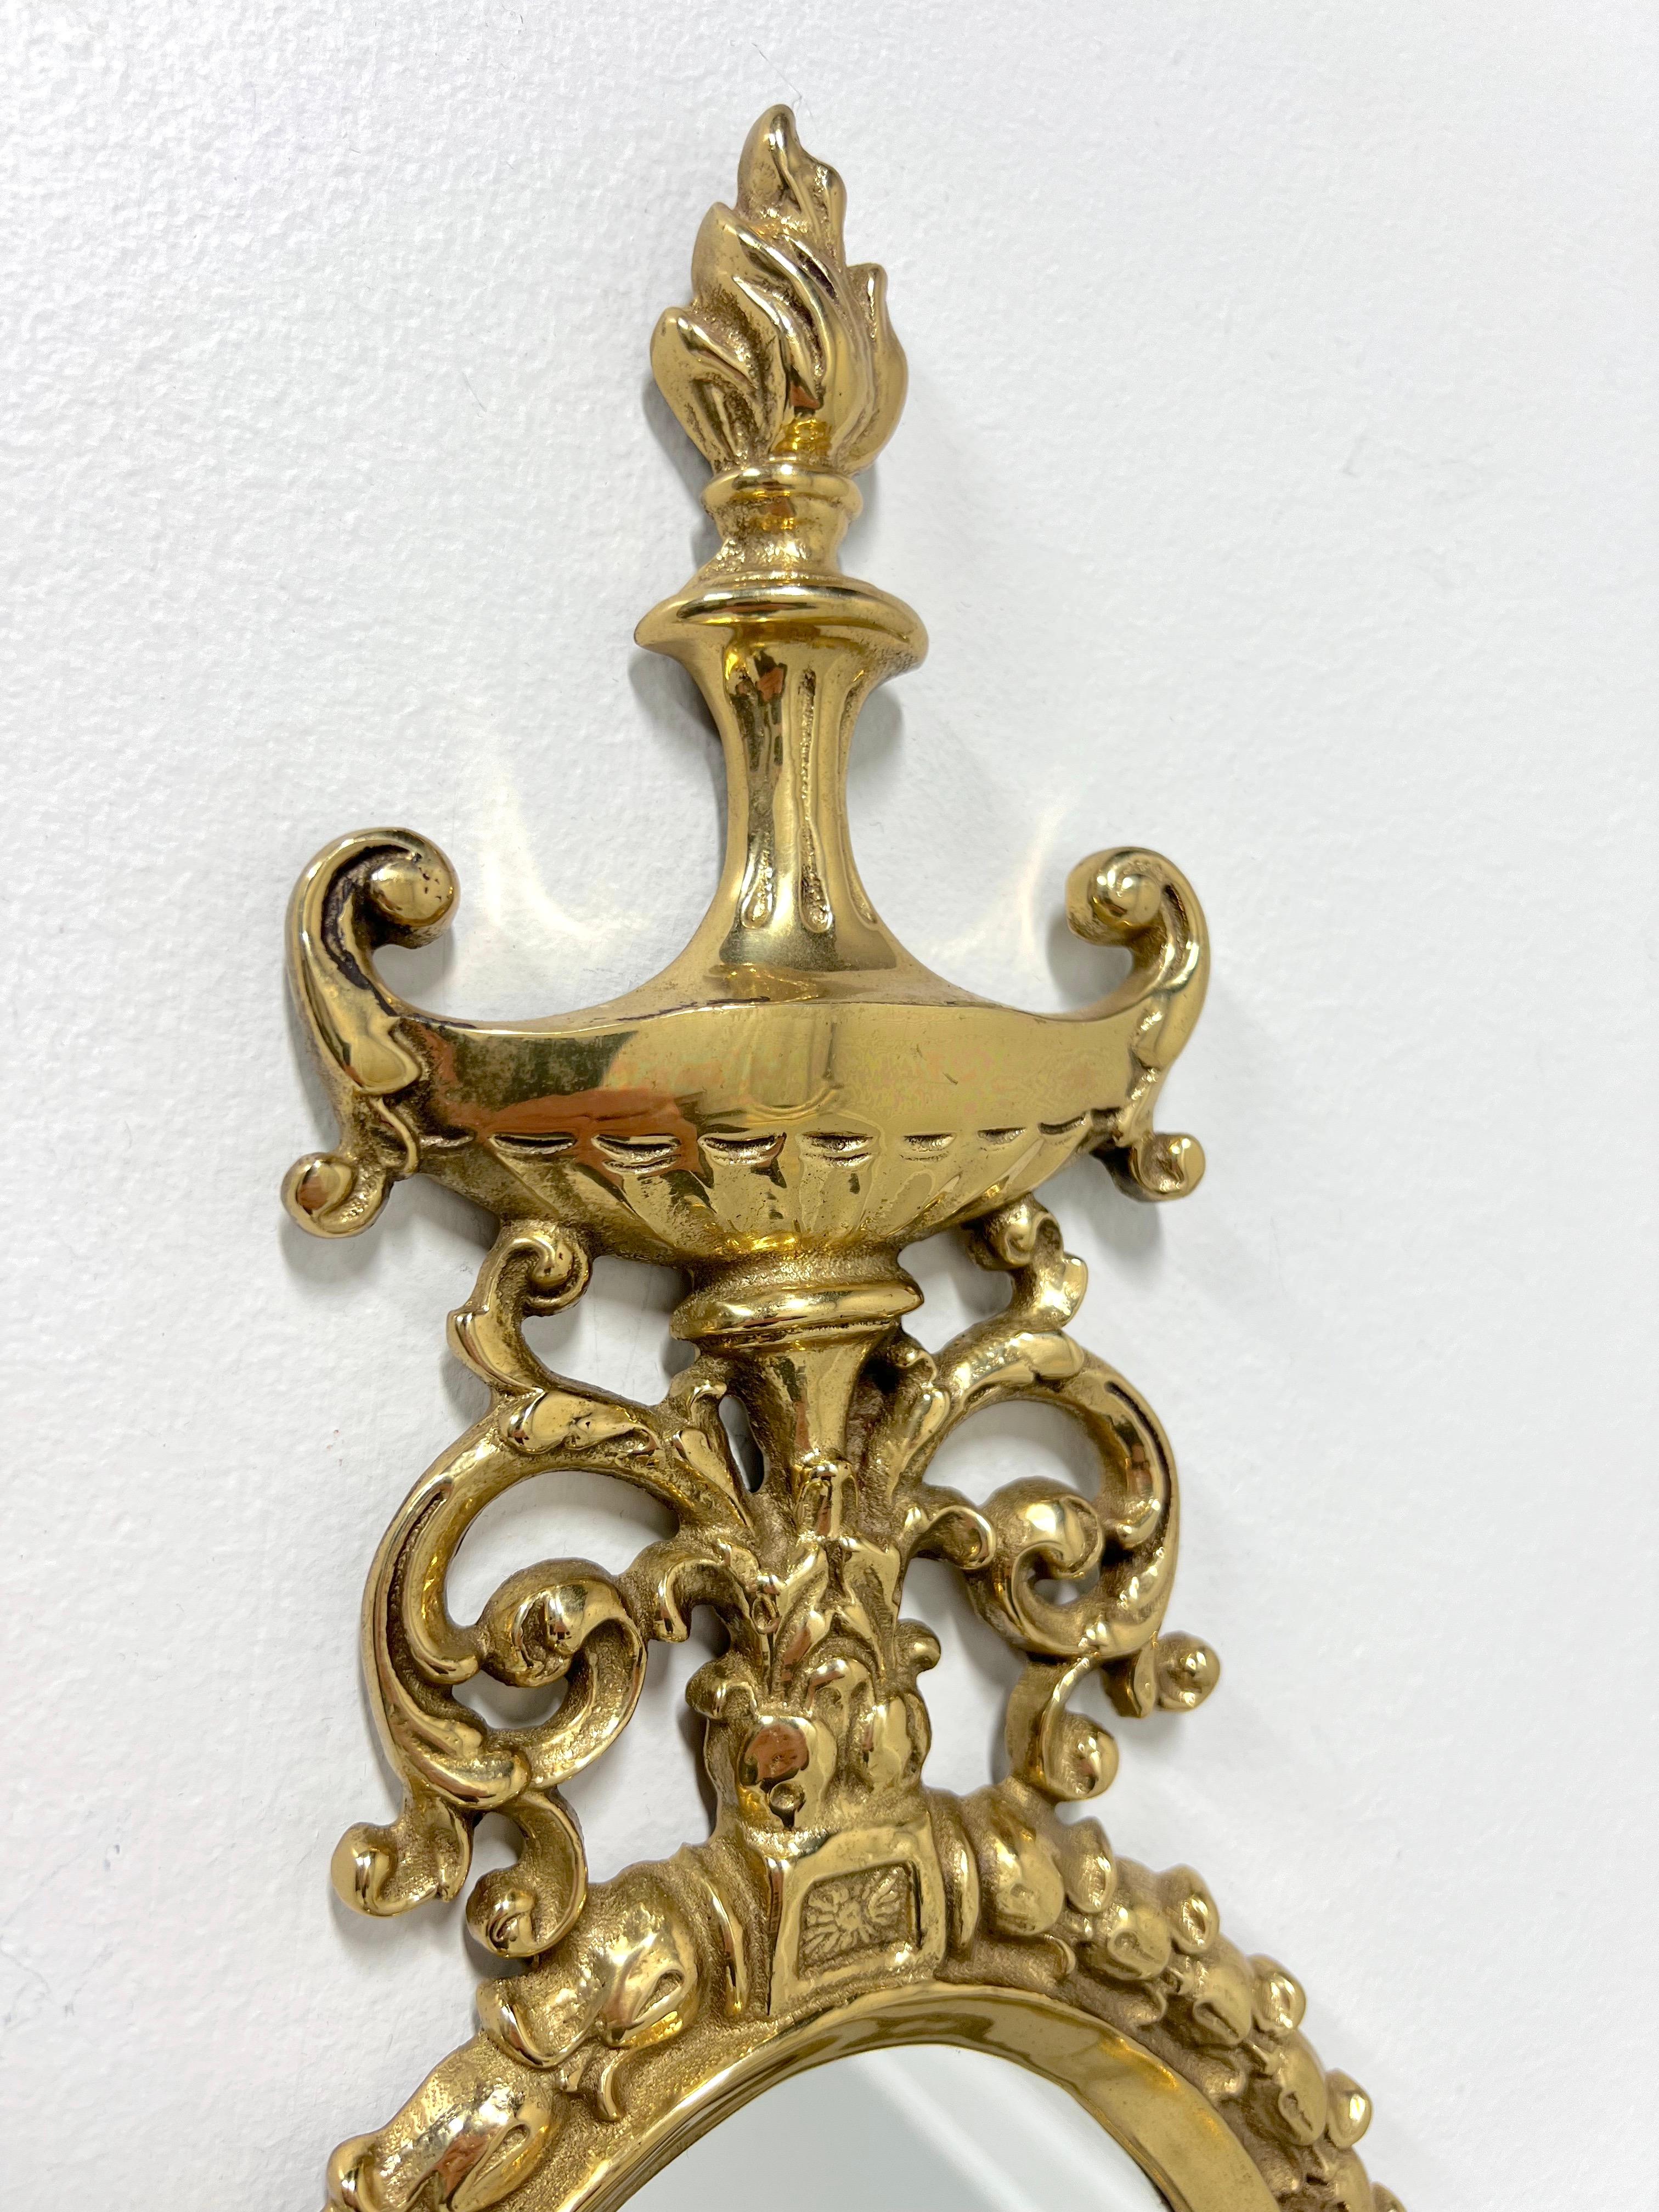 GLO-MAR ARTWORKS Mid 20th Century Brass French Provincial Candle Sconces - Pair In Good Condition For Sale In Charlotte, NC